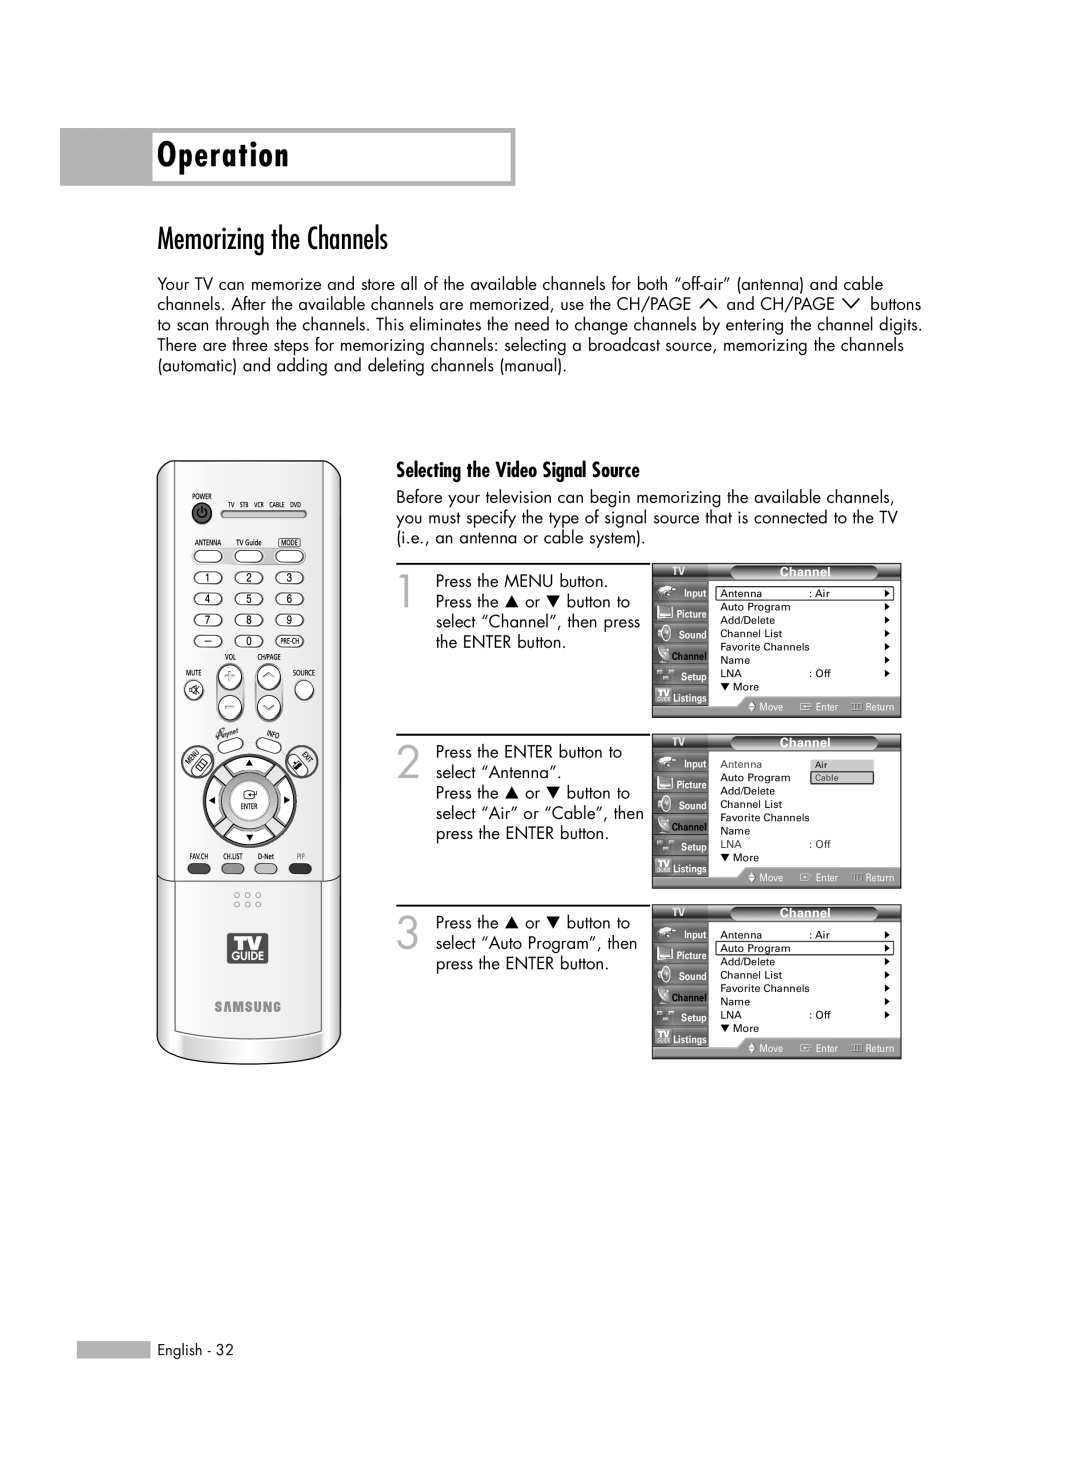 Samsung HL-R7178W, HL-R6178W, HL-R5678W manual Memorizing the Channels, Operation, Selecting the Video Signal Source 